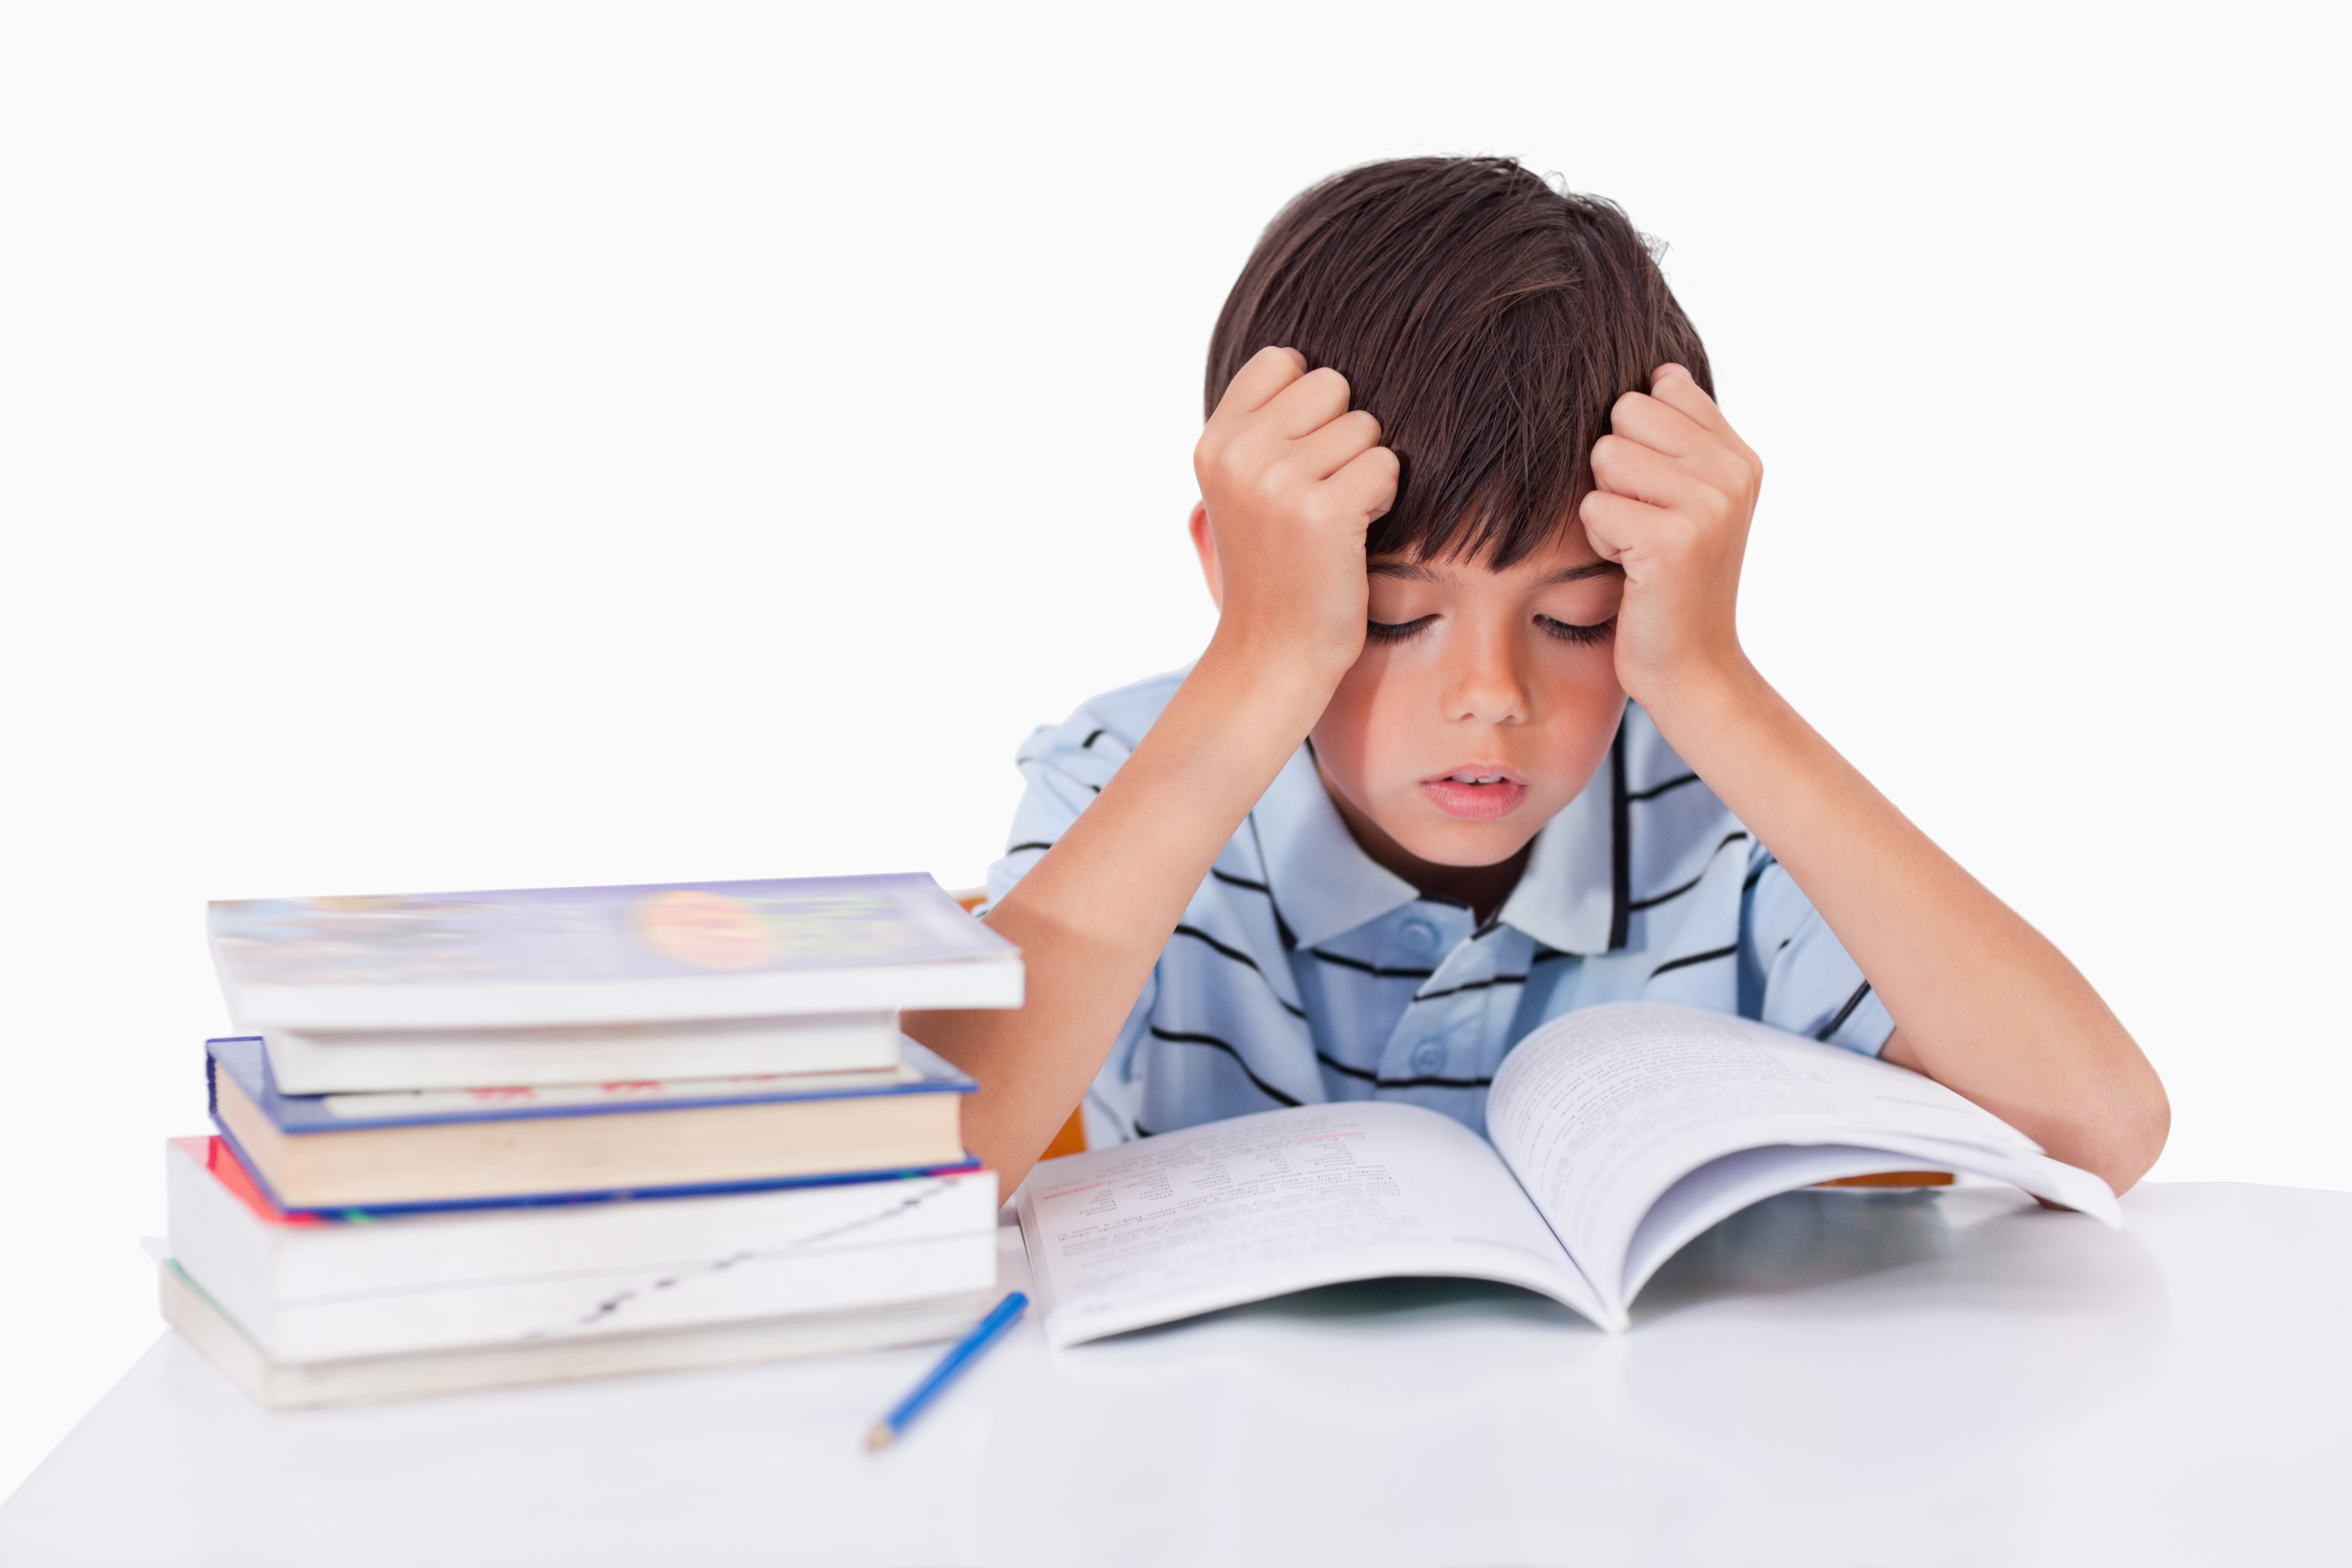 why kids should have less homework